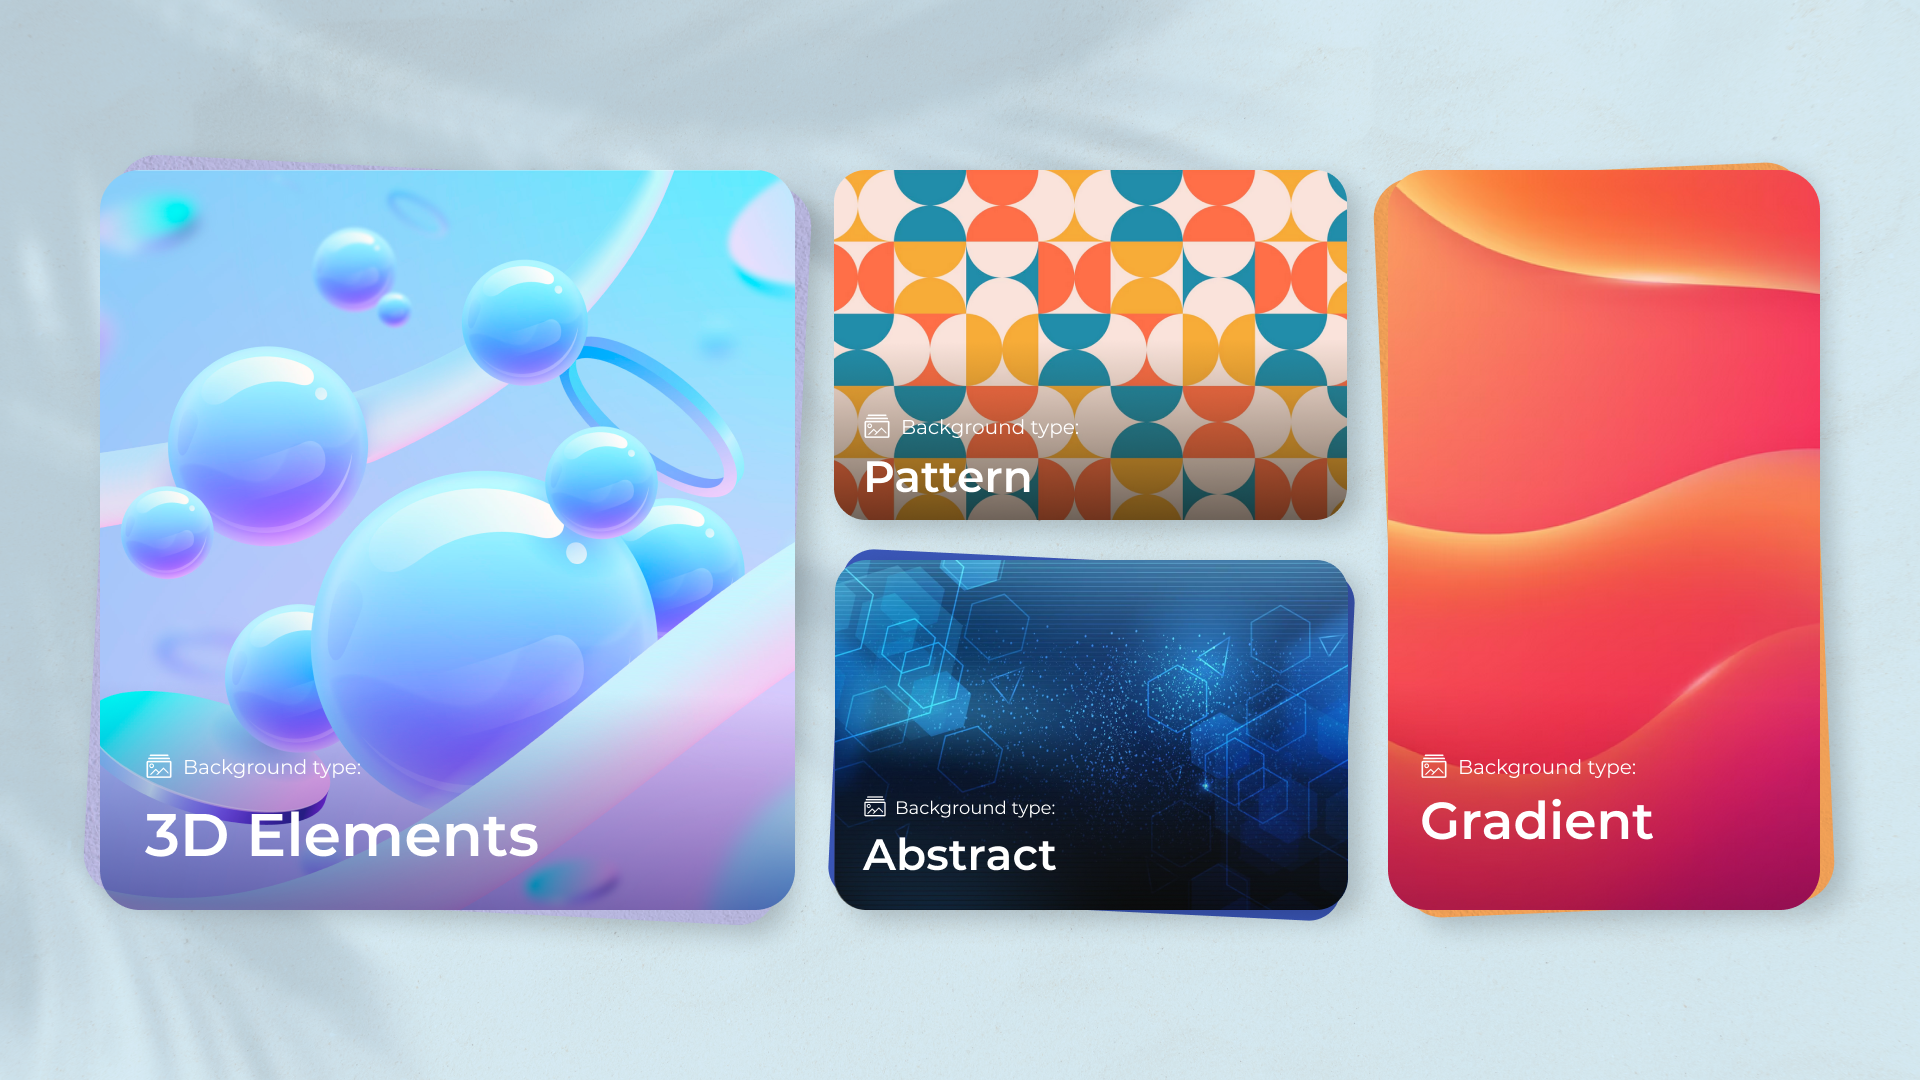 Cards with different patterns on them, one has 3D shapes, one is geometrical, one has gradient